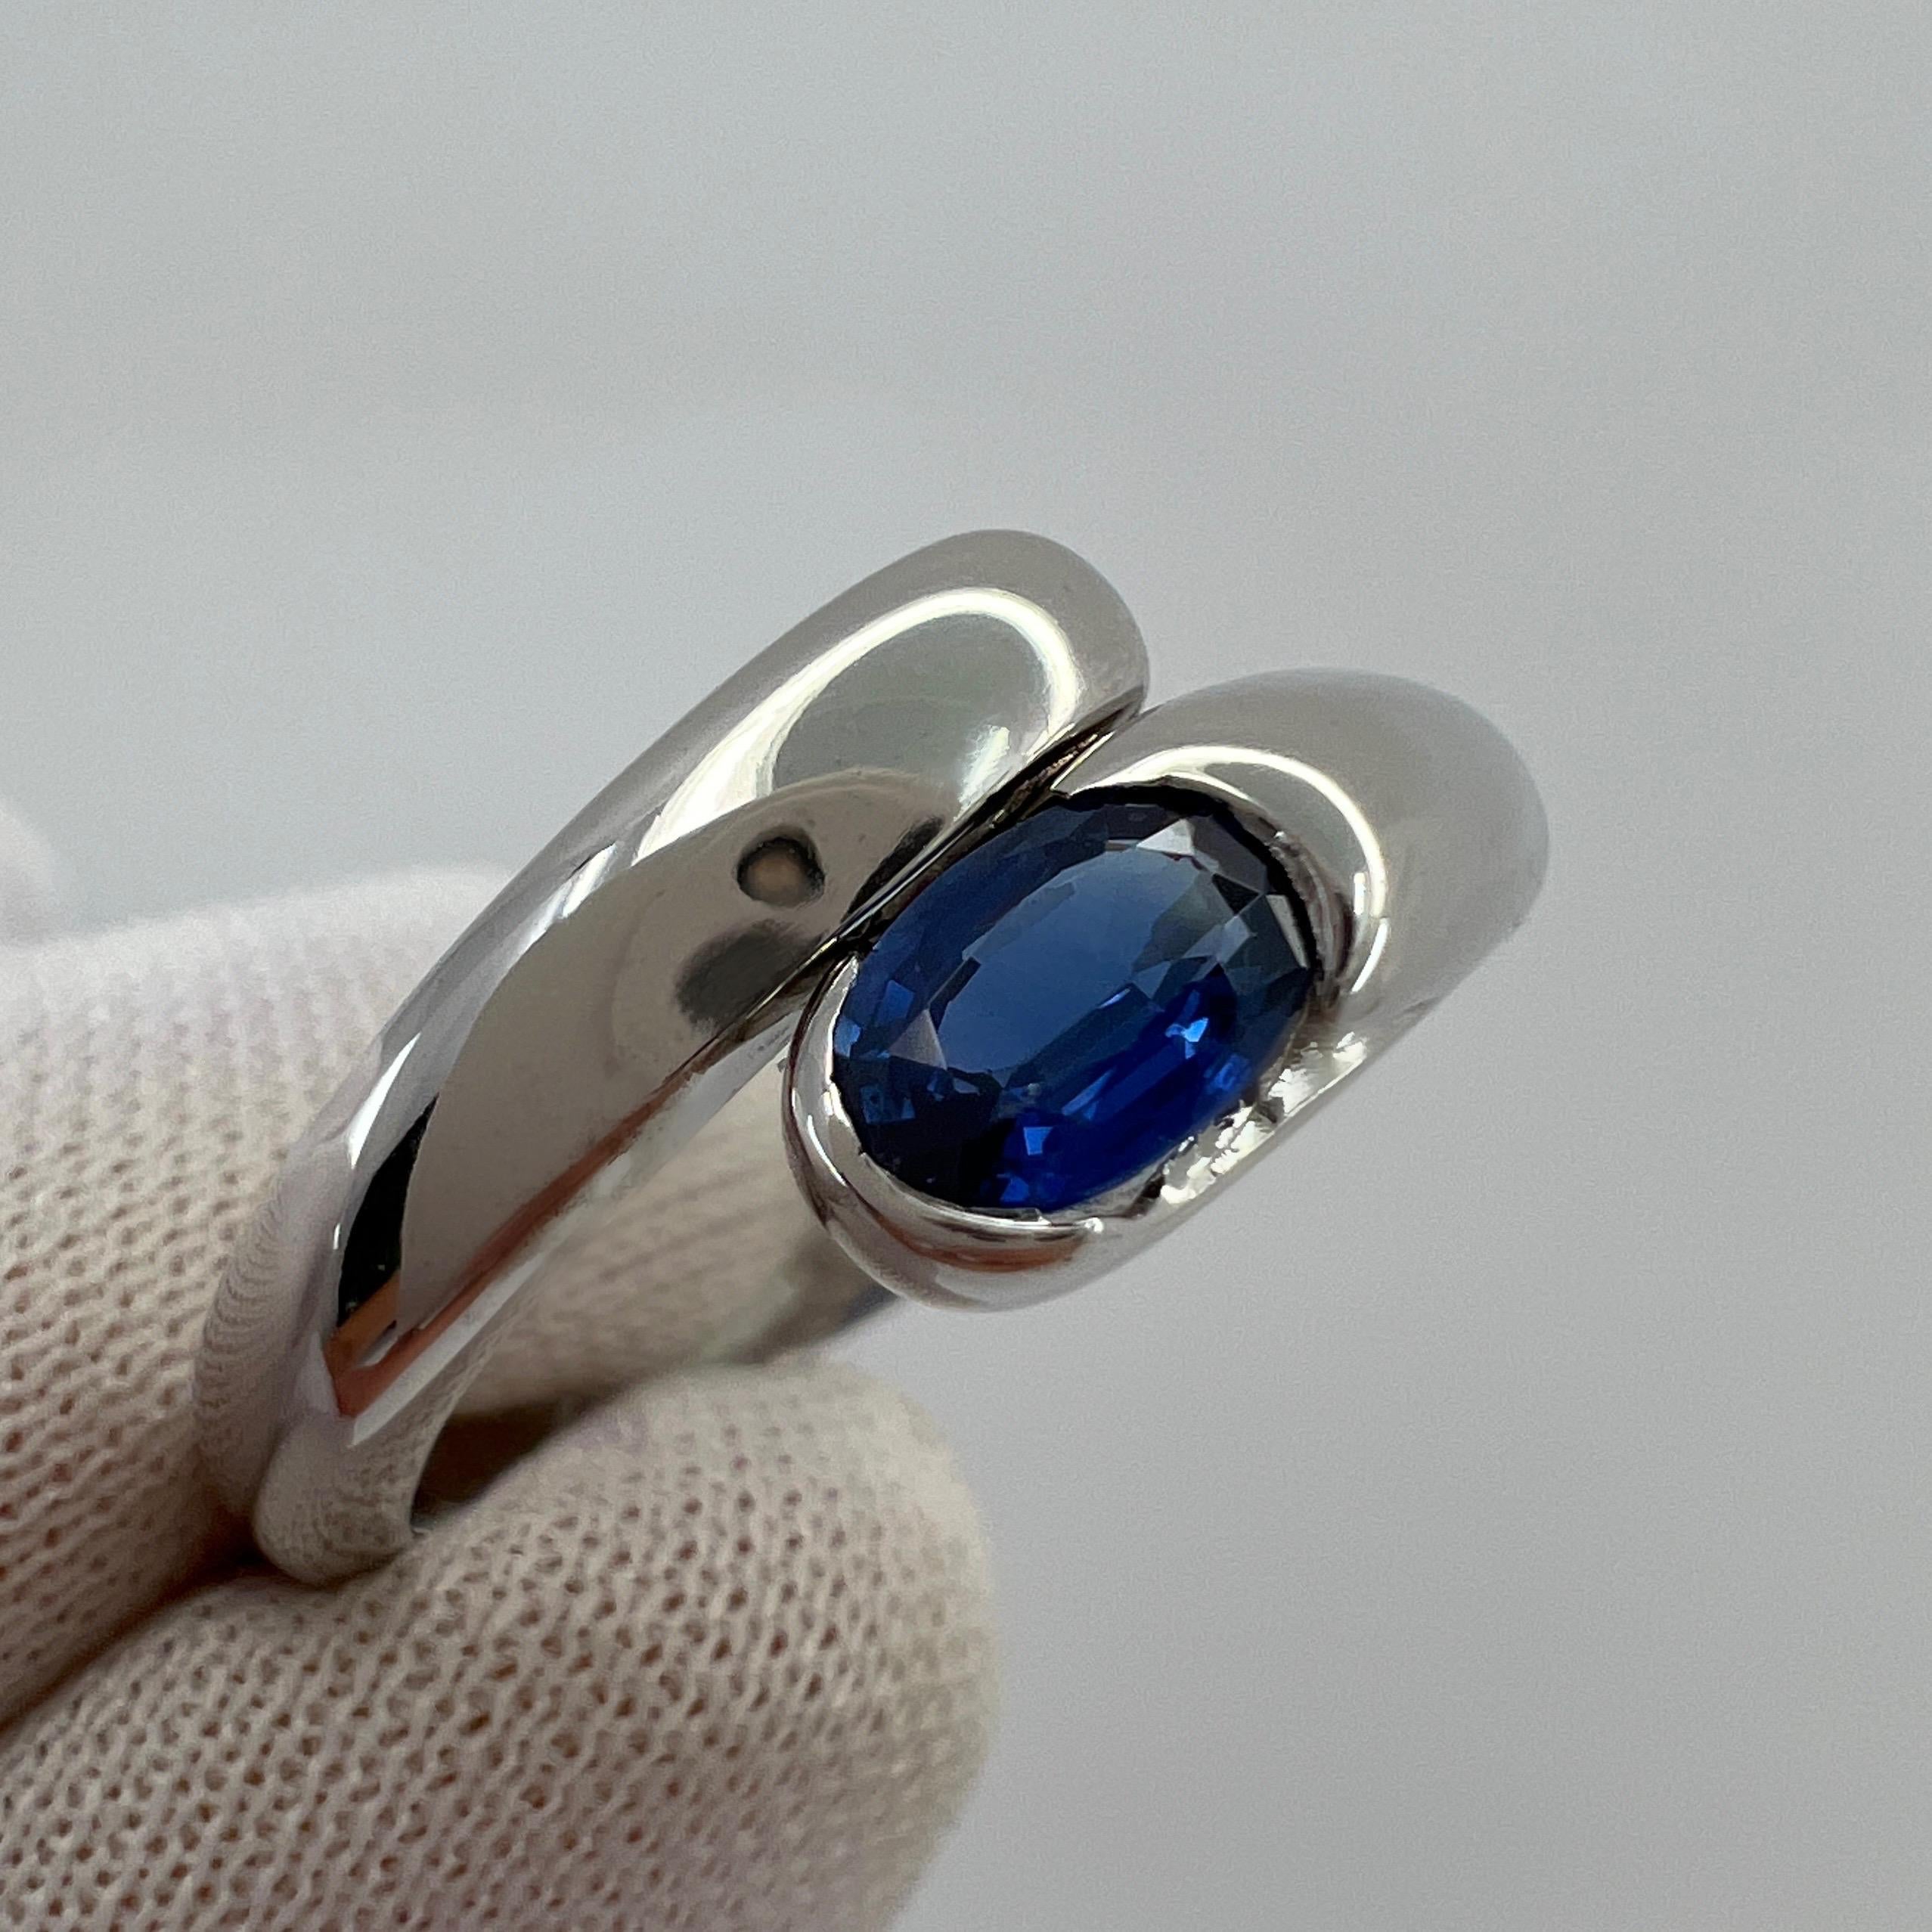 Bvlgari Astrea Blue Sapphire And Diamond Oval Cut 18k White Gold Ring.

The classic Bvlgari snake theme from the more modern Astrea line, this 18k white gold bypass ring wraps comfortably around the finger. 

The ring is set with a beautiful oval